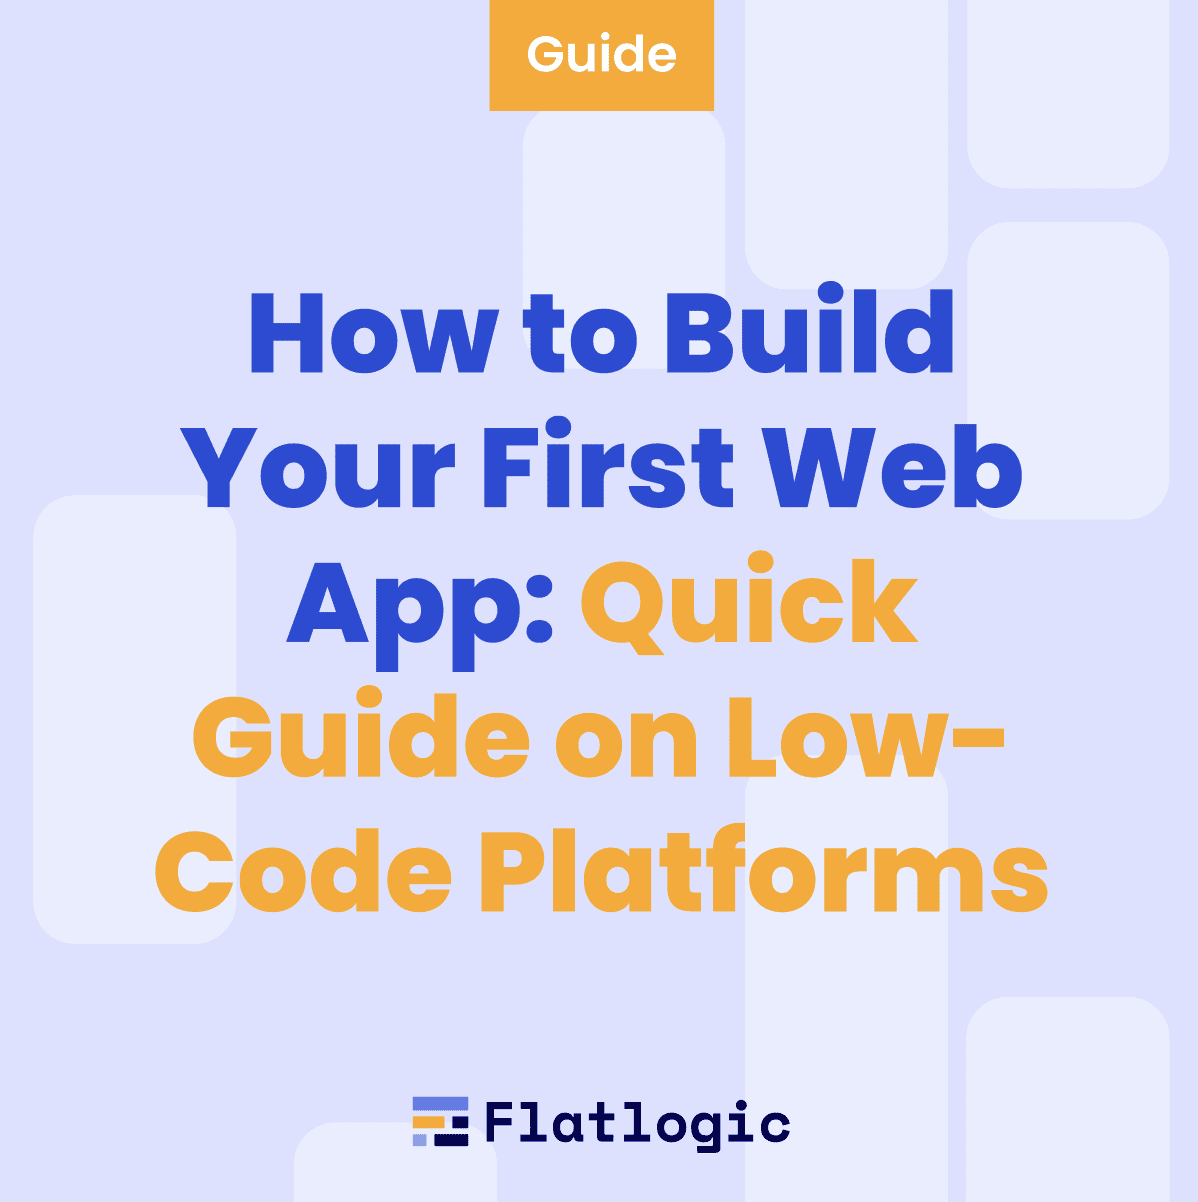 How to Build Your First Web App on Low-Code Platforms